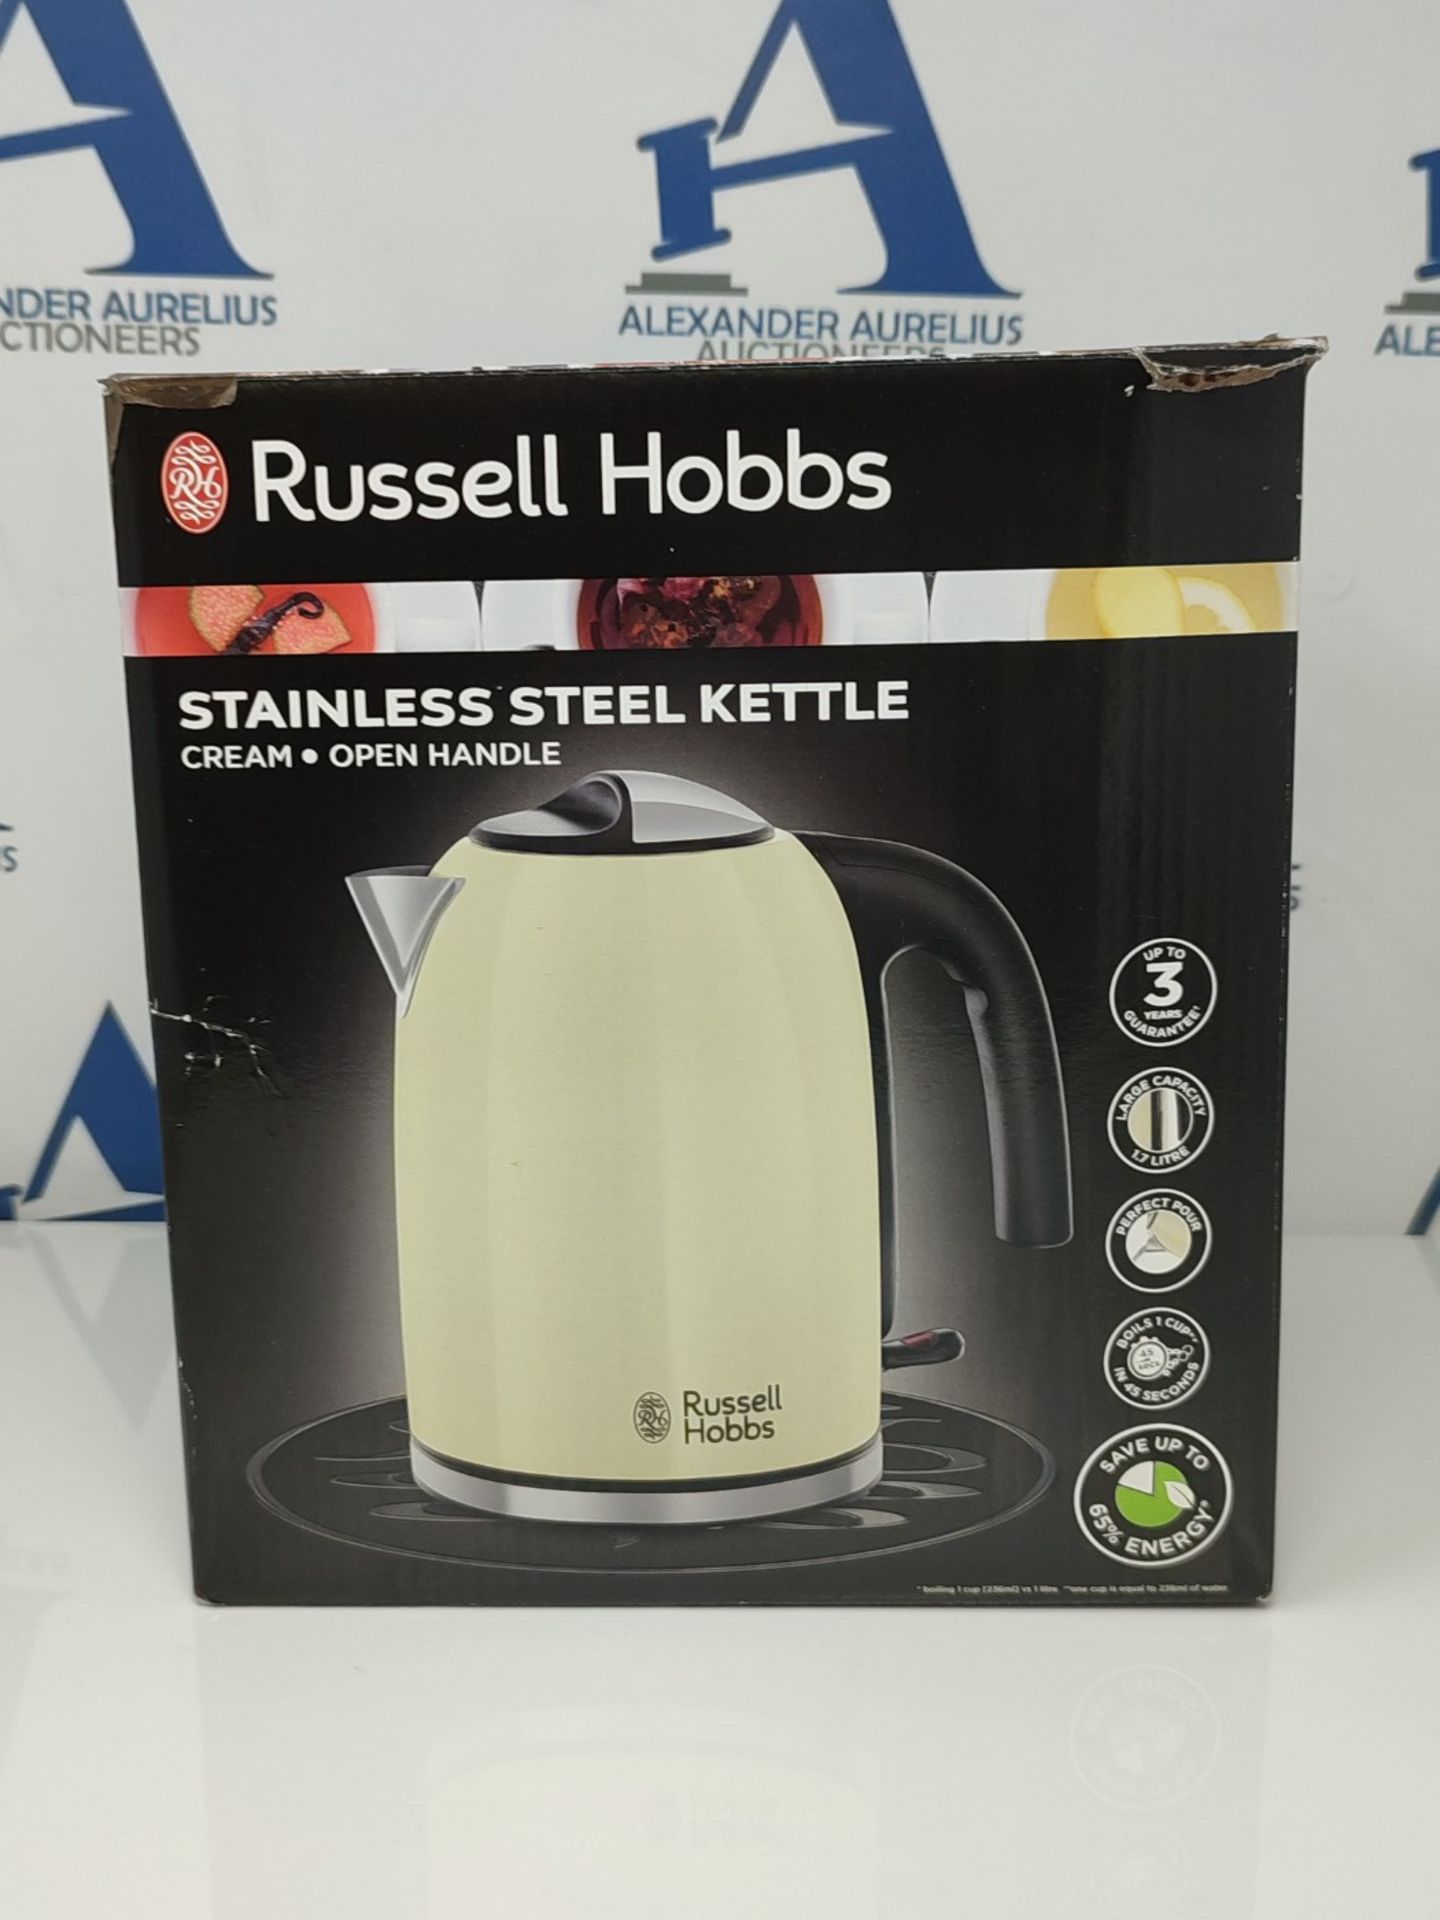 Russell Hobbs 20415 Stainless Steel Electric Kettle, 1.7 Litre, Cream - Image 2 of 3